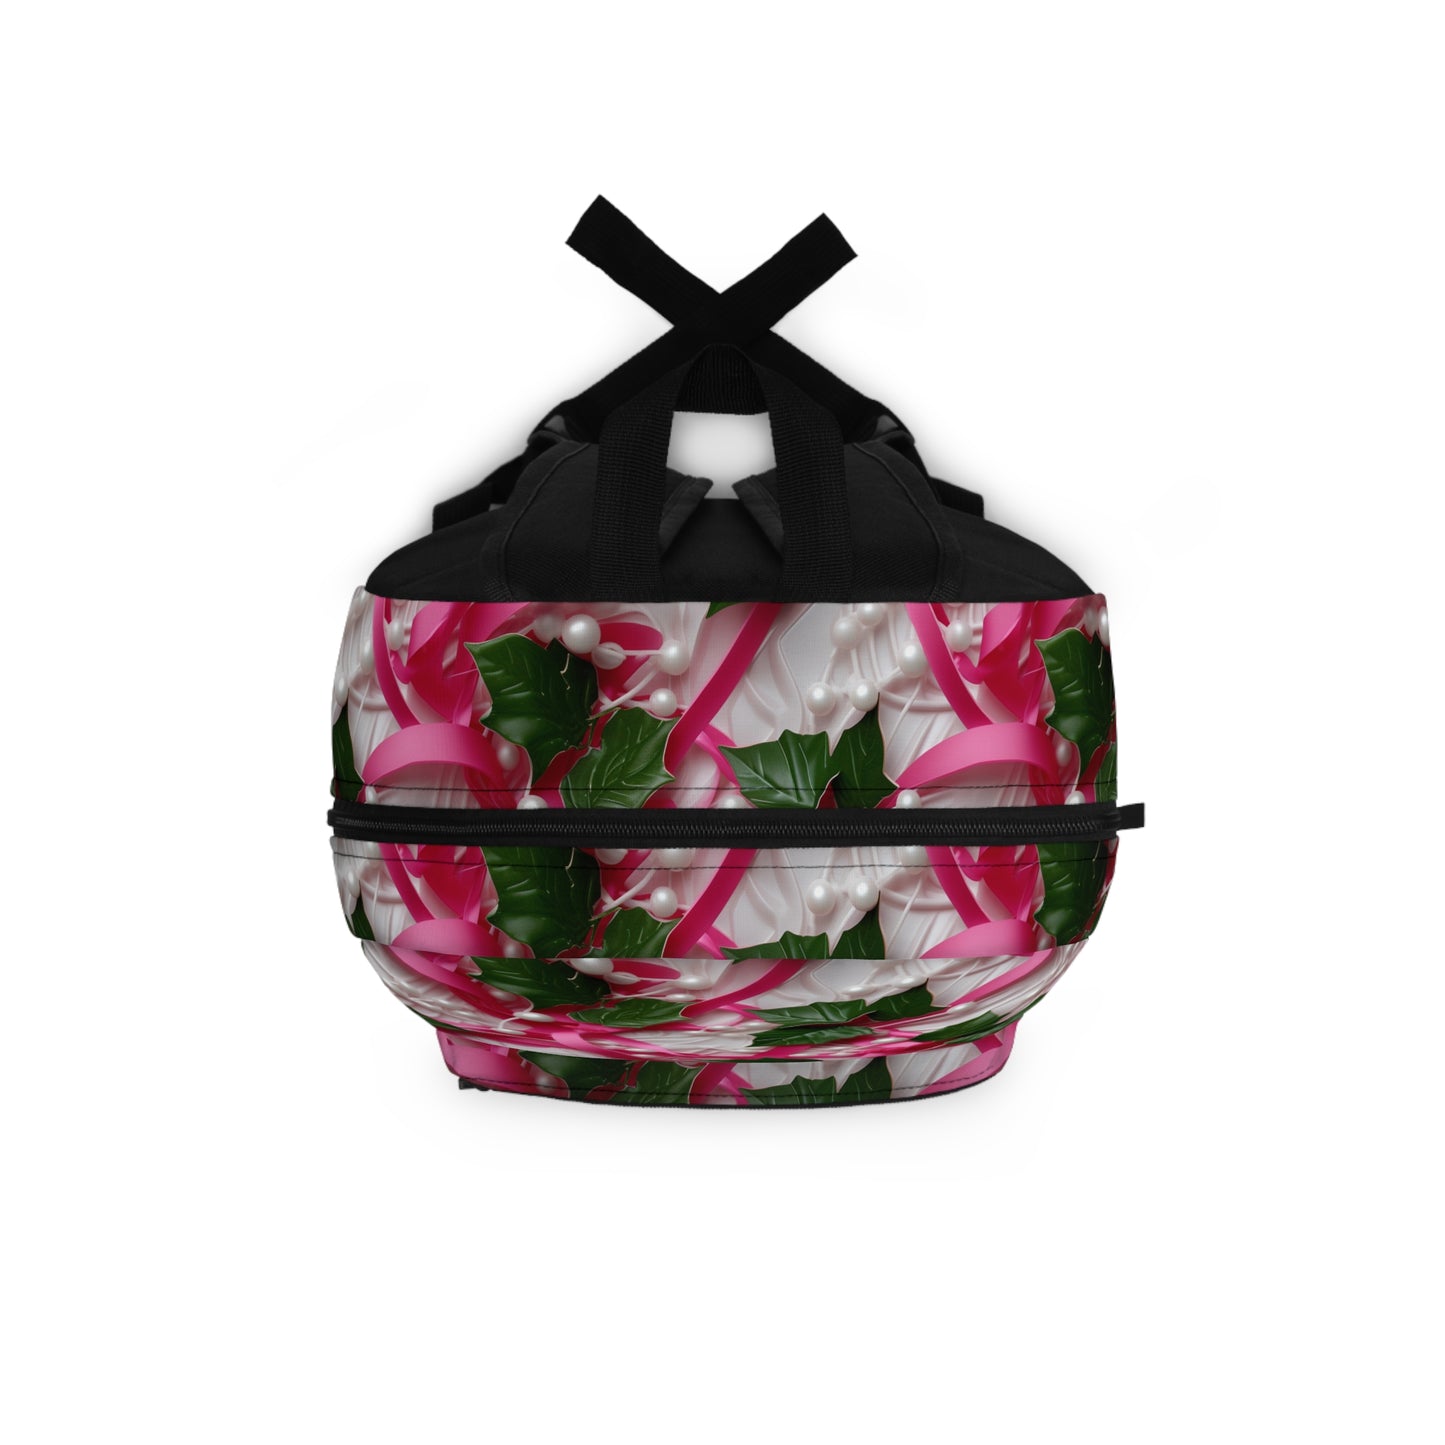 Pink Ribbons, Ivy & Pearls Backpack